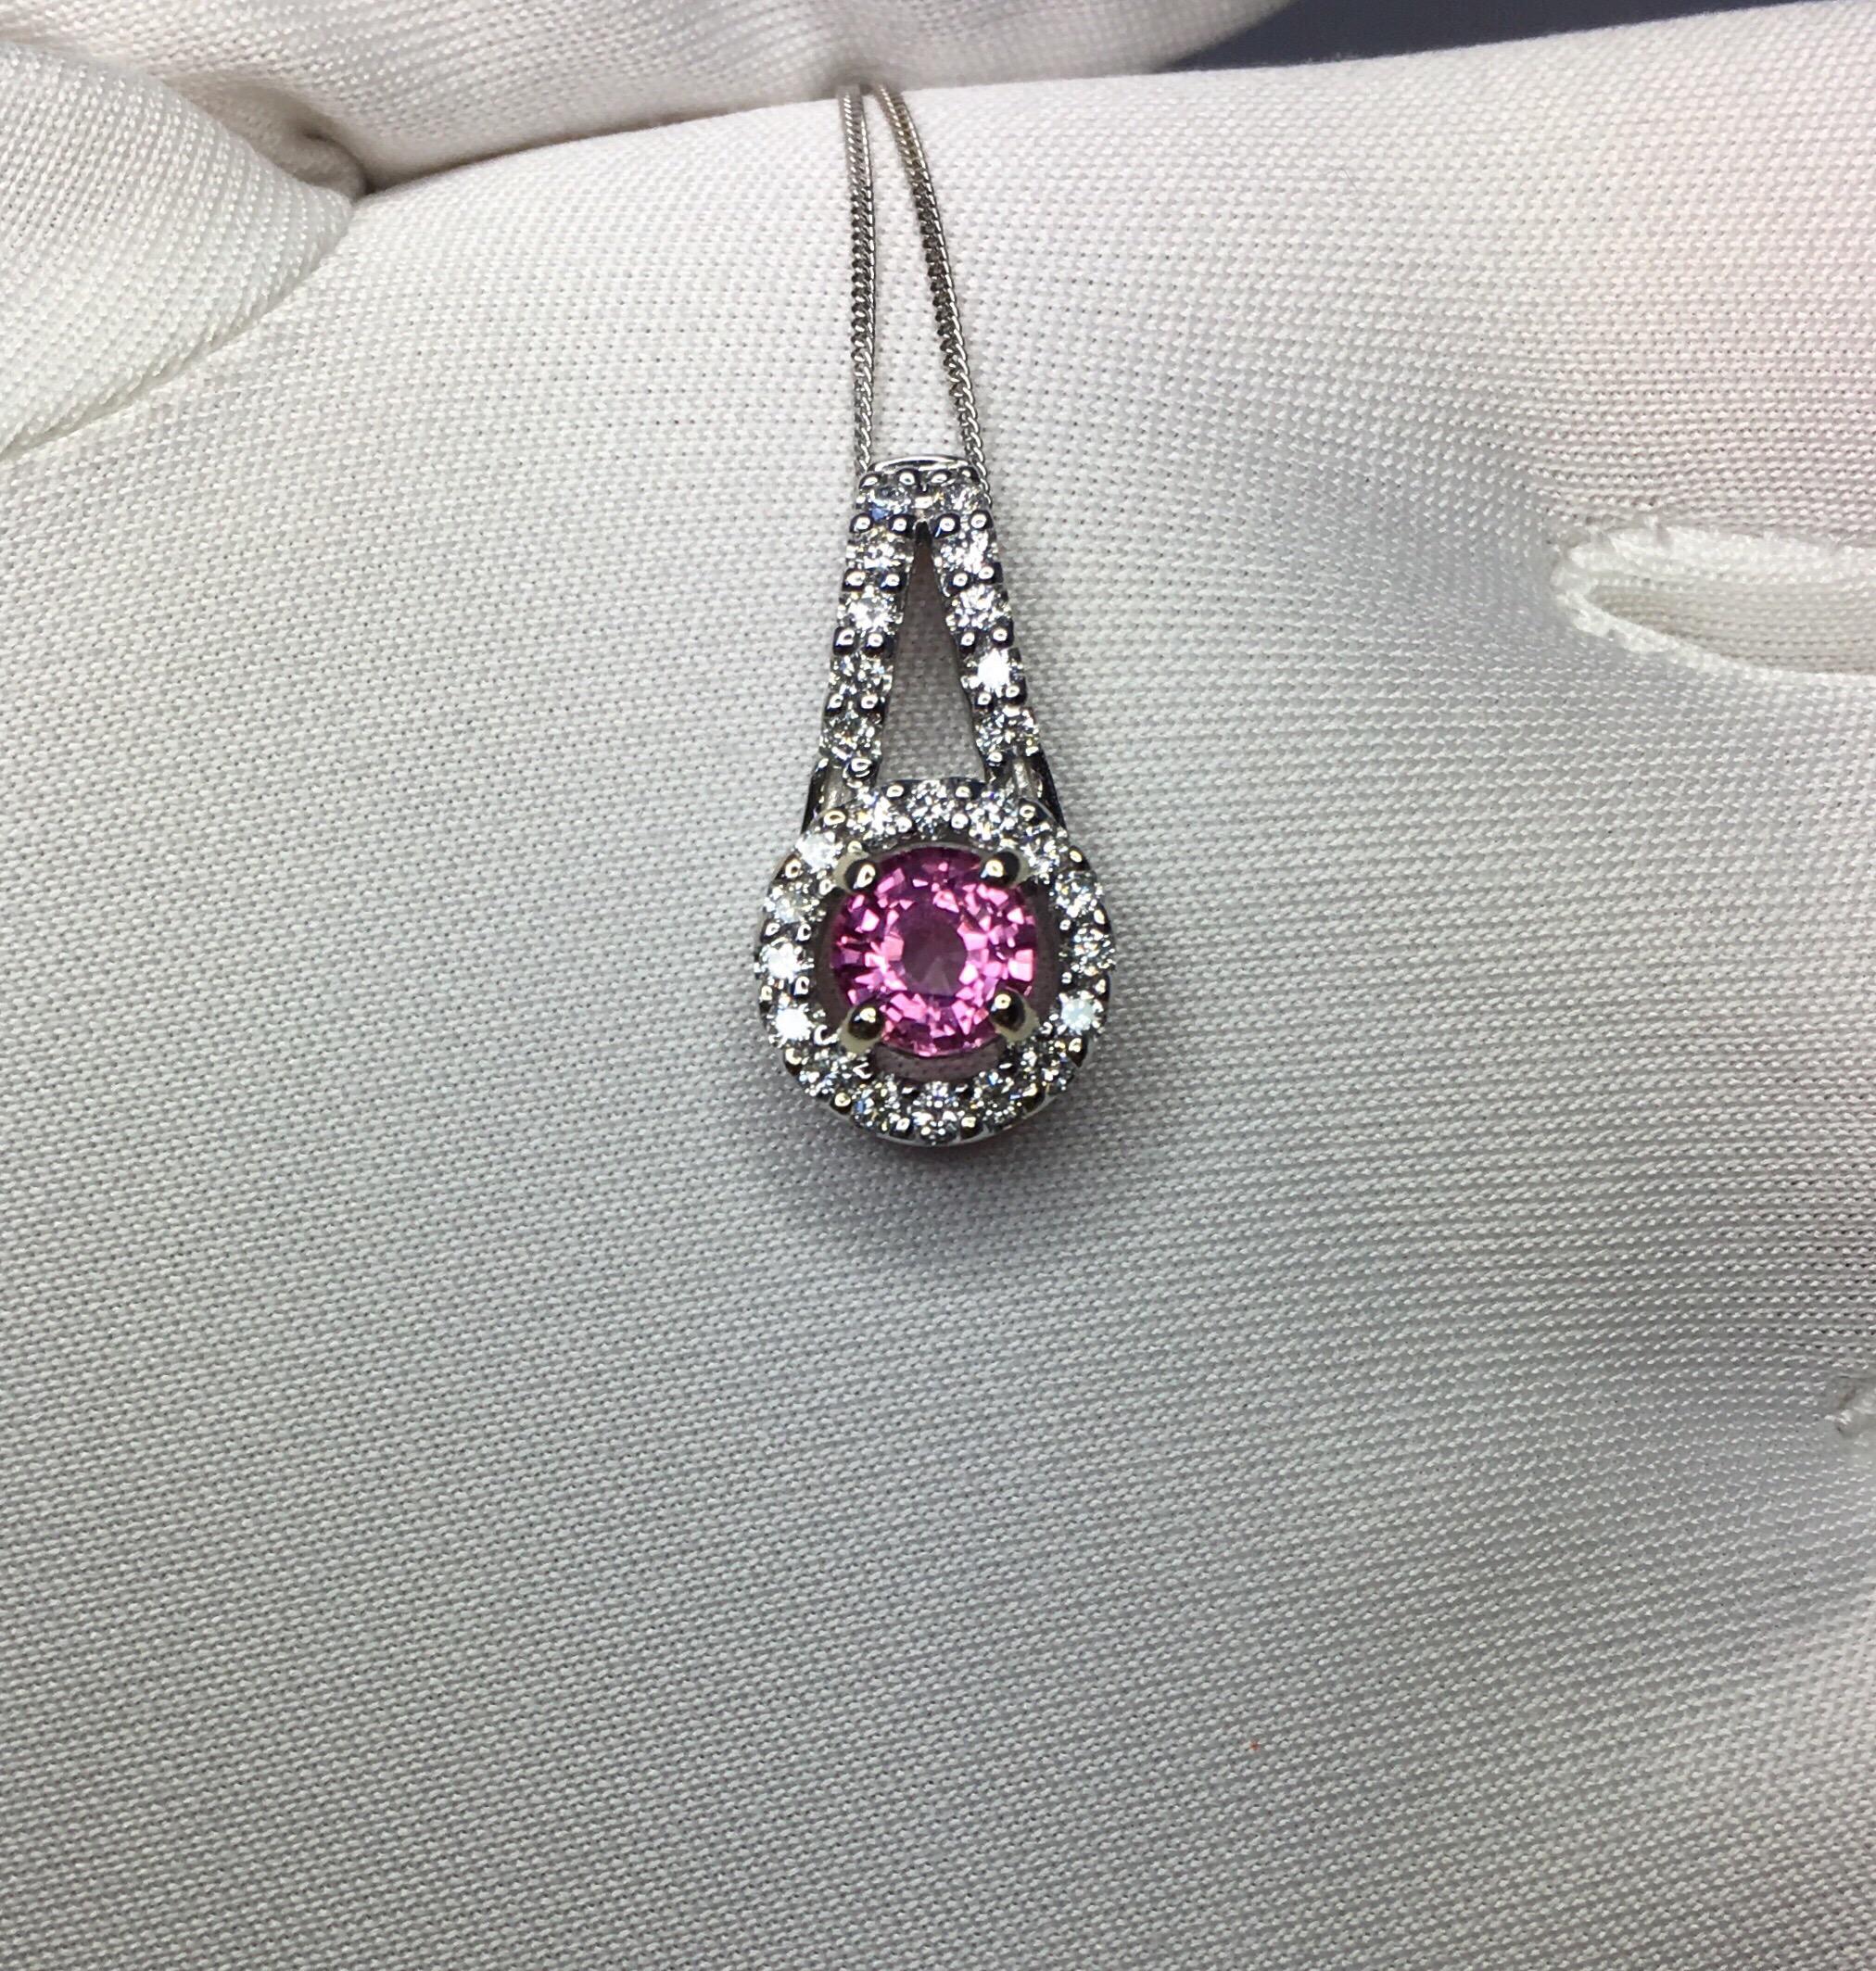 Stunning natural vivid pink sapphire set in a fine 18k white gold diamond cluster pendant. 

0.62 carat centre sapphire (5mm) with stunning pink colour and excellent clarity. Top grade stone. 

This stone also has an excellent quality cut which